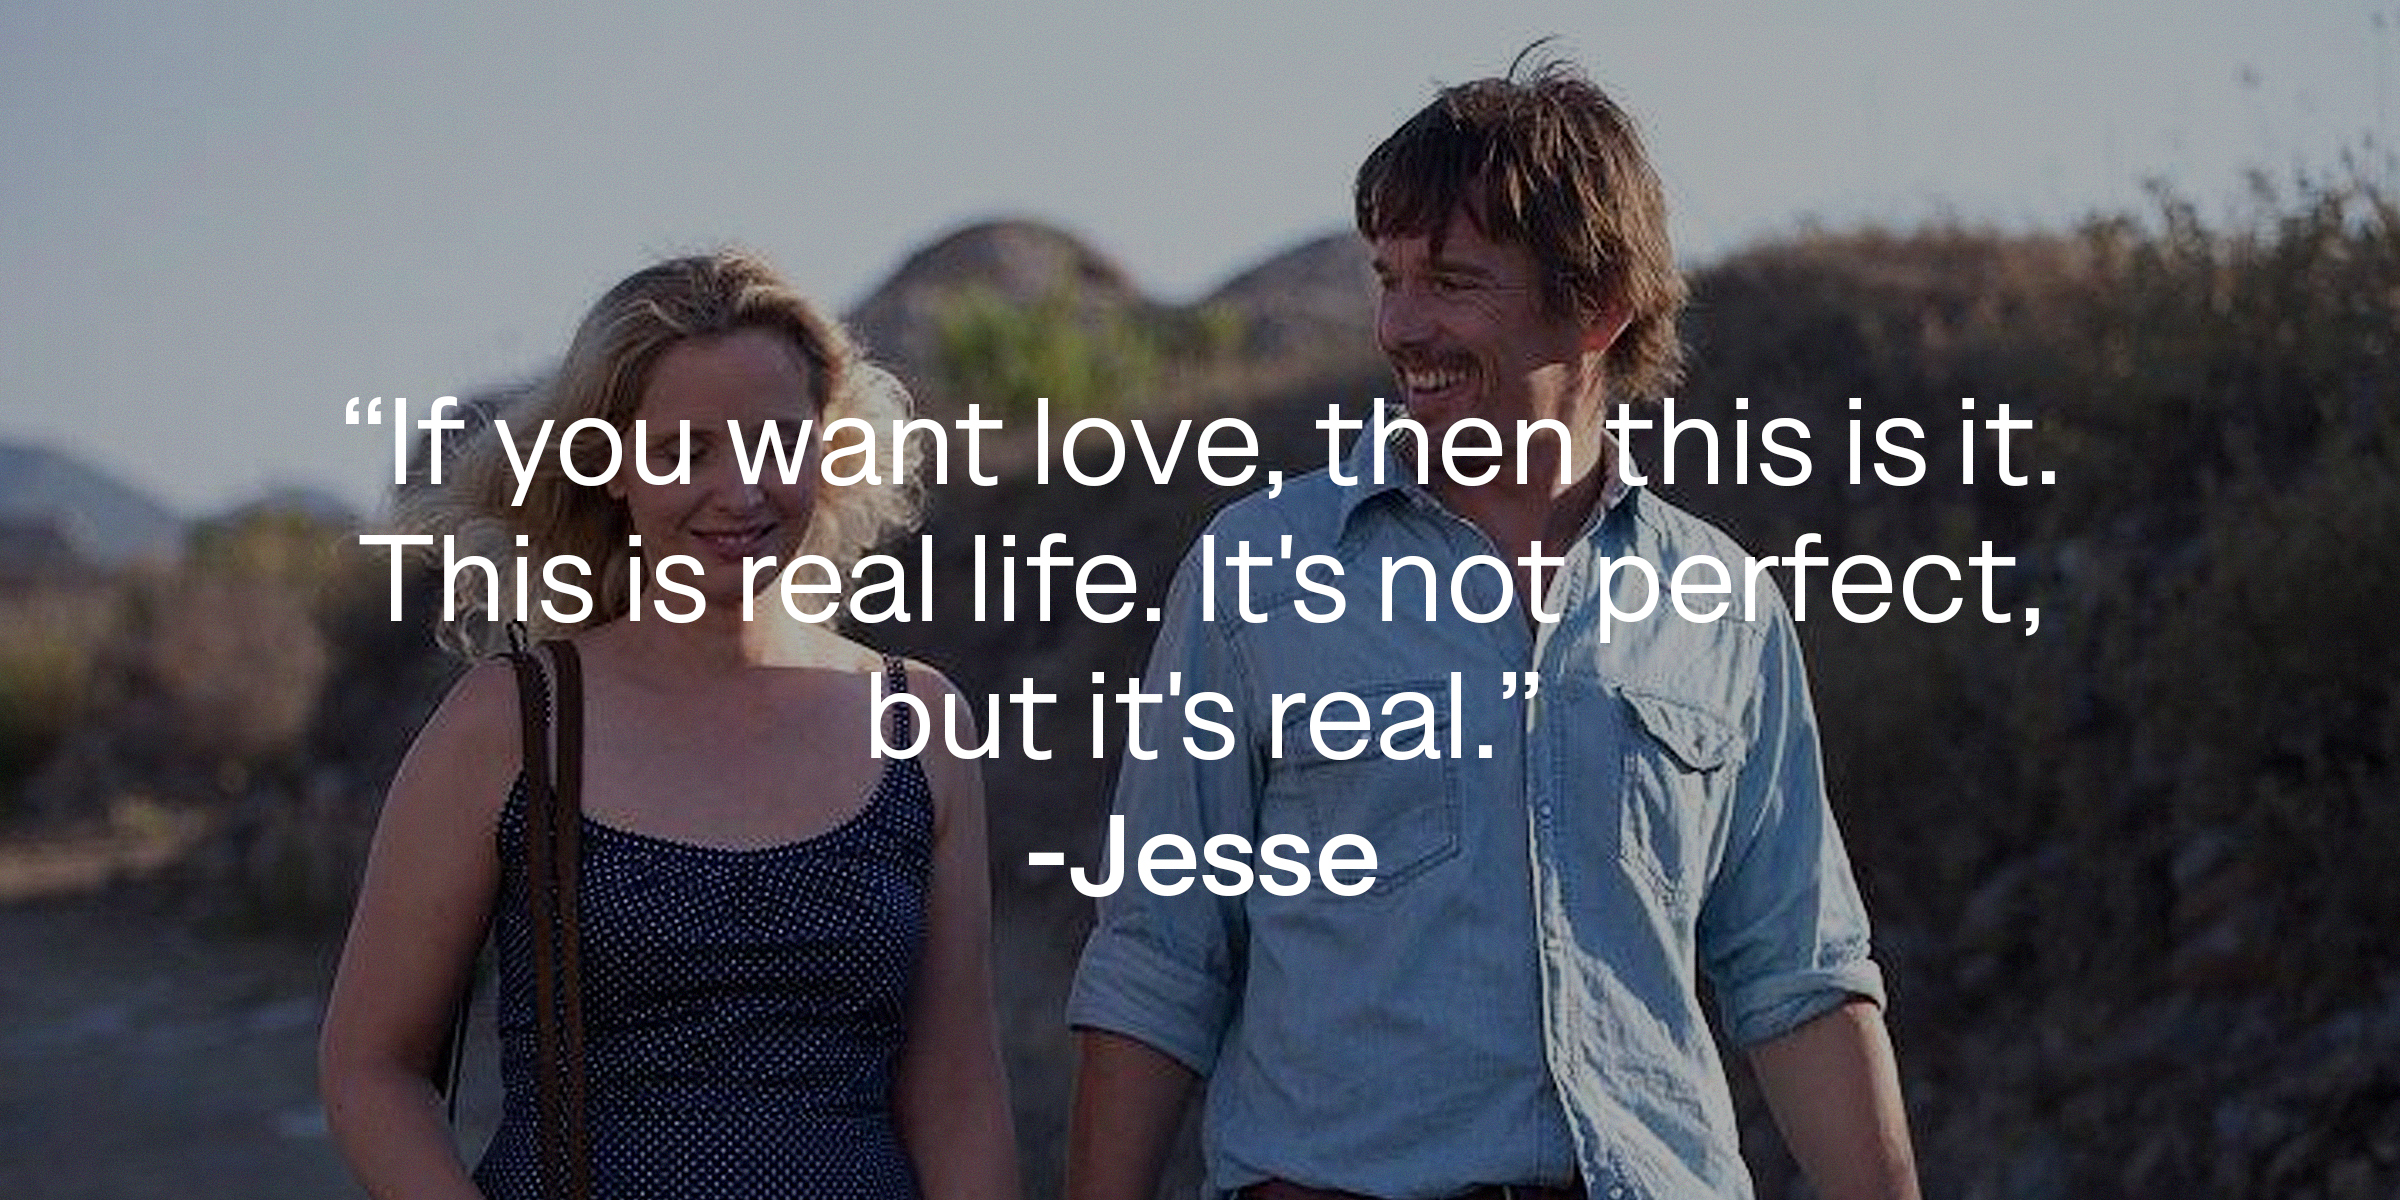 Jesse and Celine, with Jesse’s quote: “If you want love, then this is it. This is real life. It's not perfect, but it's real.” │Source: facebook.com/BeforeMidnightFilm